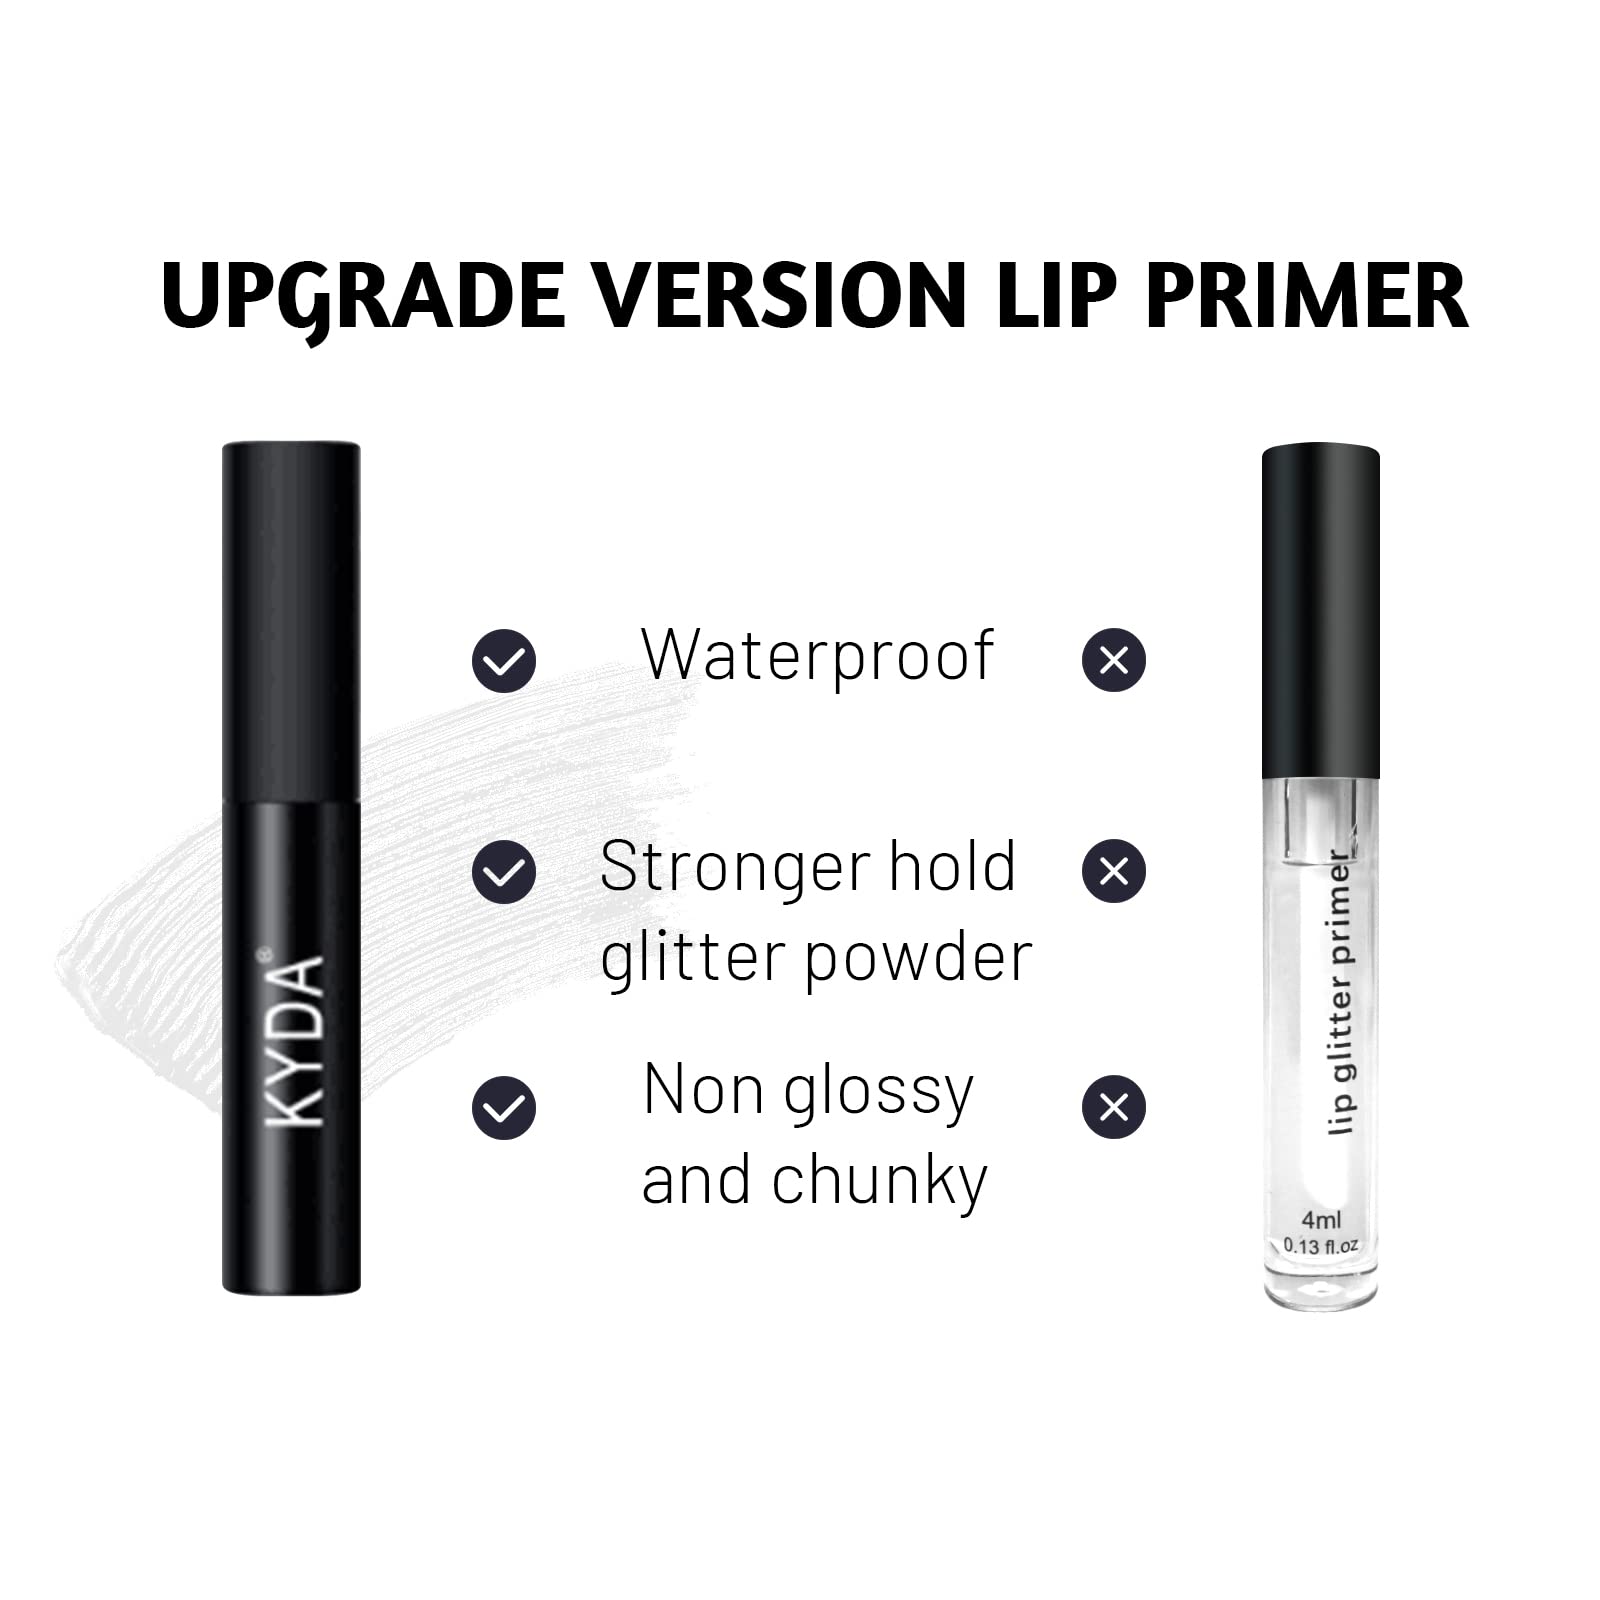 FREEORR 3 Colors Glitter Lip Kit, Diamond and Glitter Metallic Lip Powder with Lip Primer, Waterproof Long Lasting & Smudge Proof, Shimmer Sparkly Glitter Lip Cosmetic without Sticky Flake Off Set A